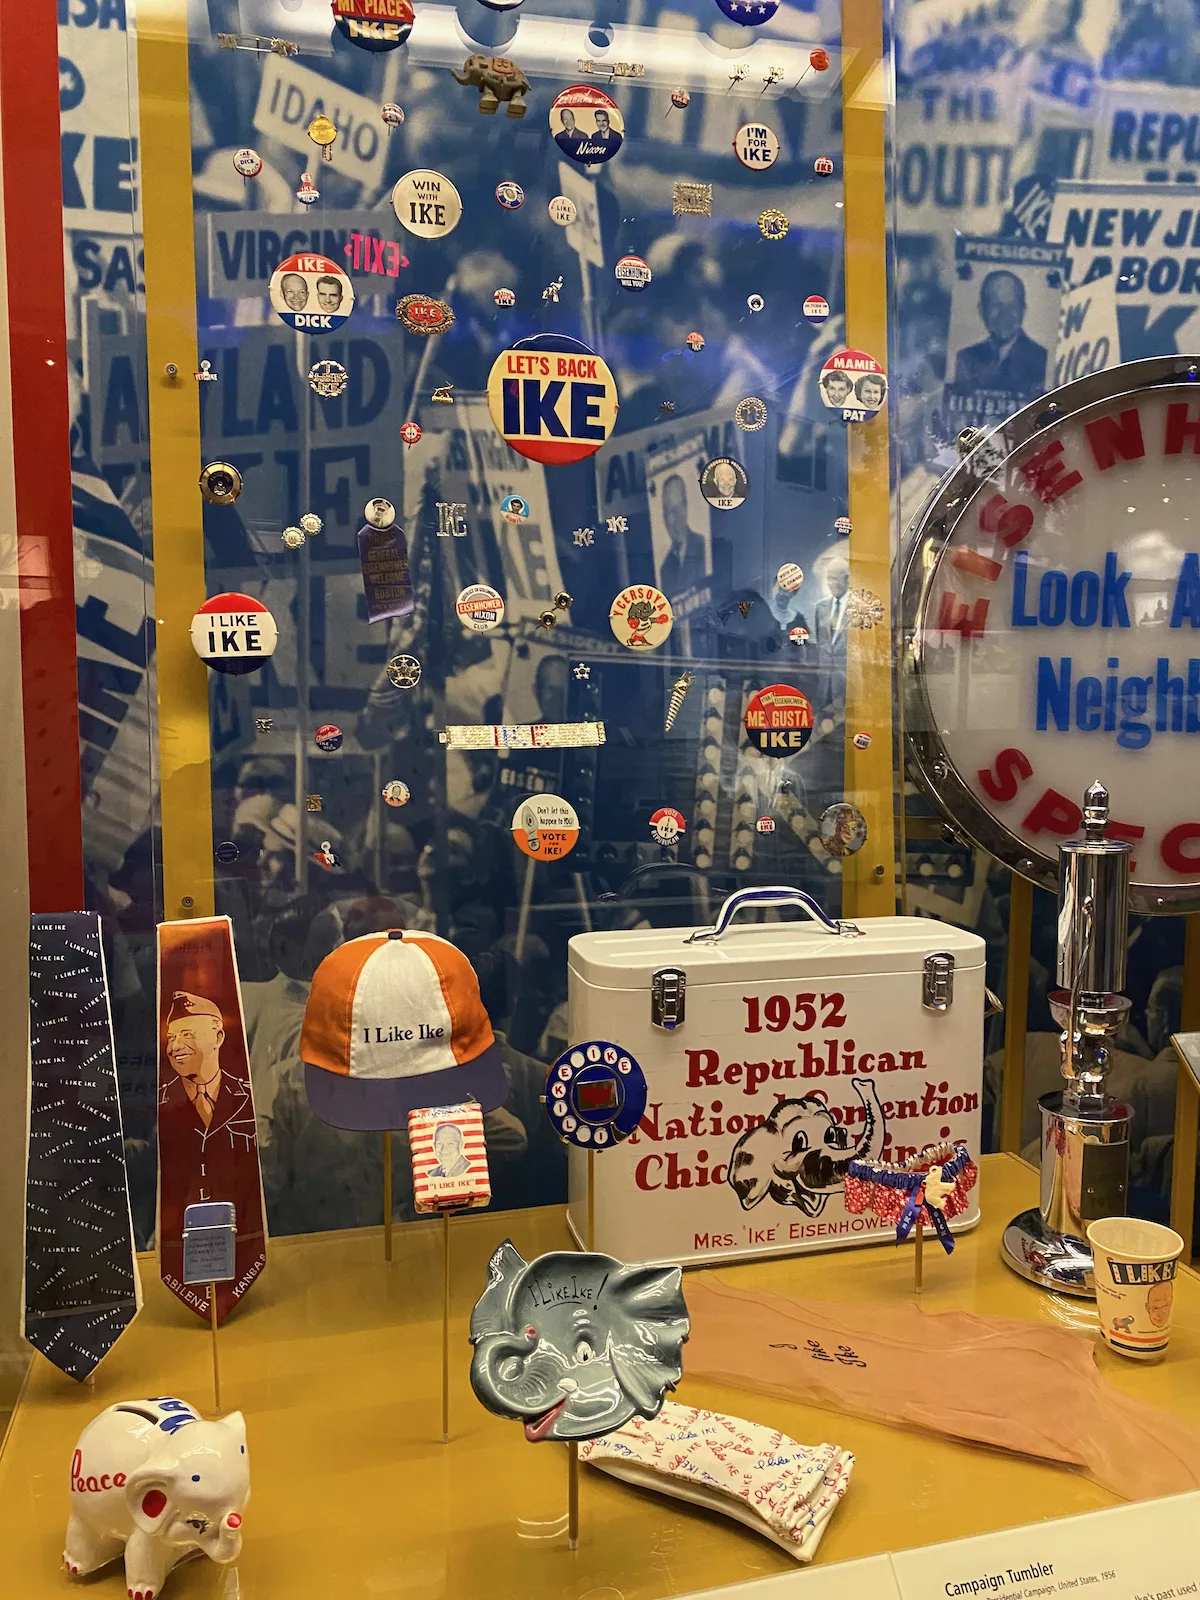 Memorabilia from the presidential campaigns of President Eisenhower at the Dwight D. Eisenhower Presidential Museum & Library in Abilene, Kansas